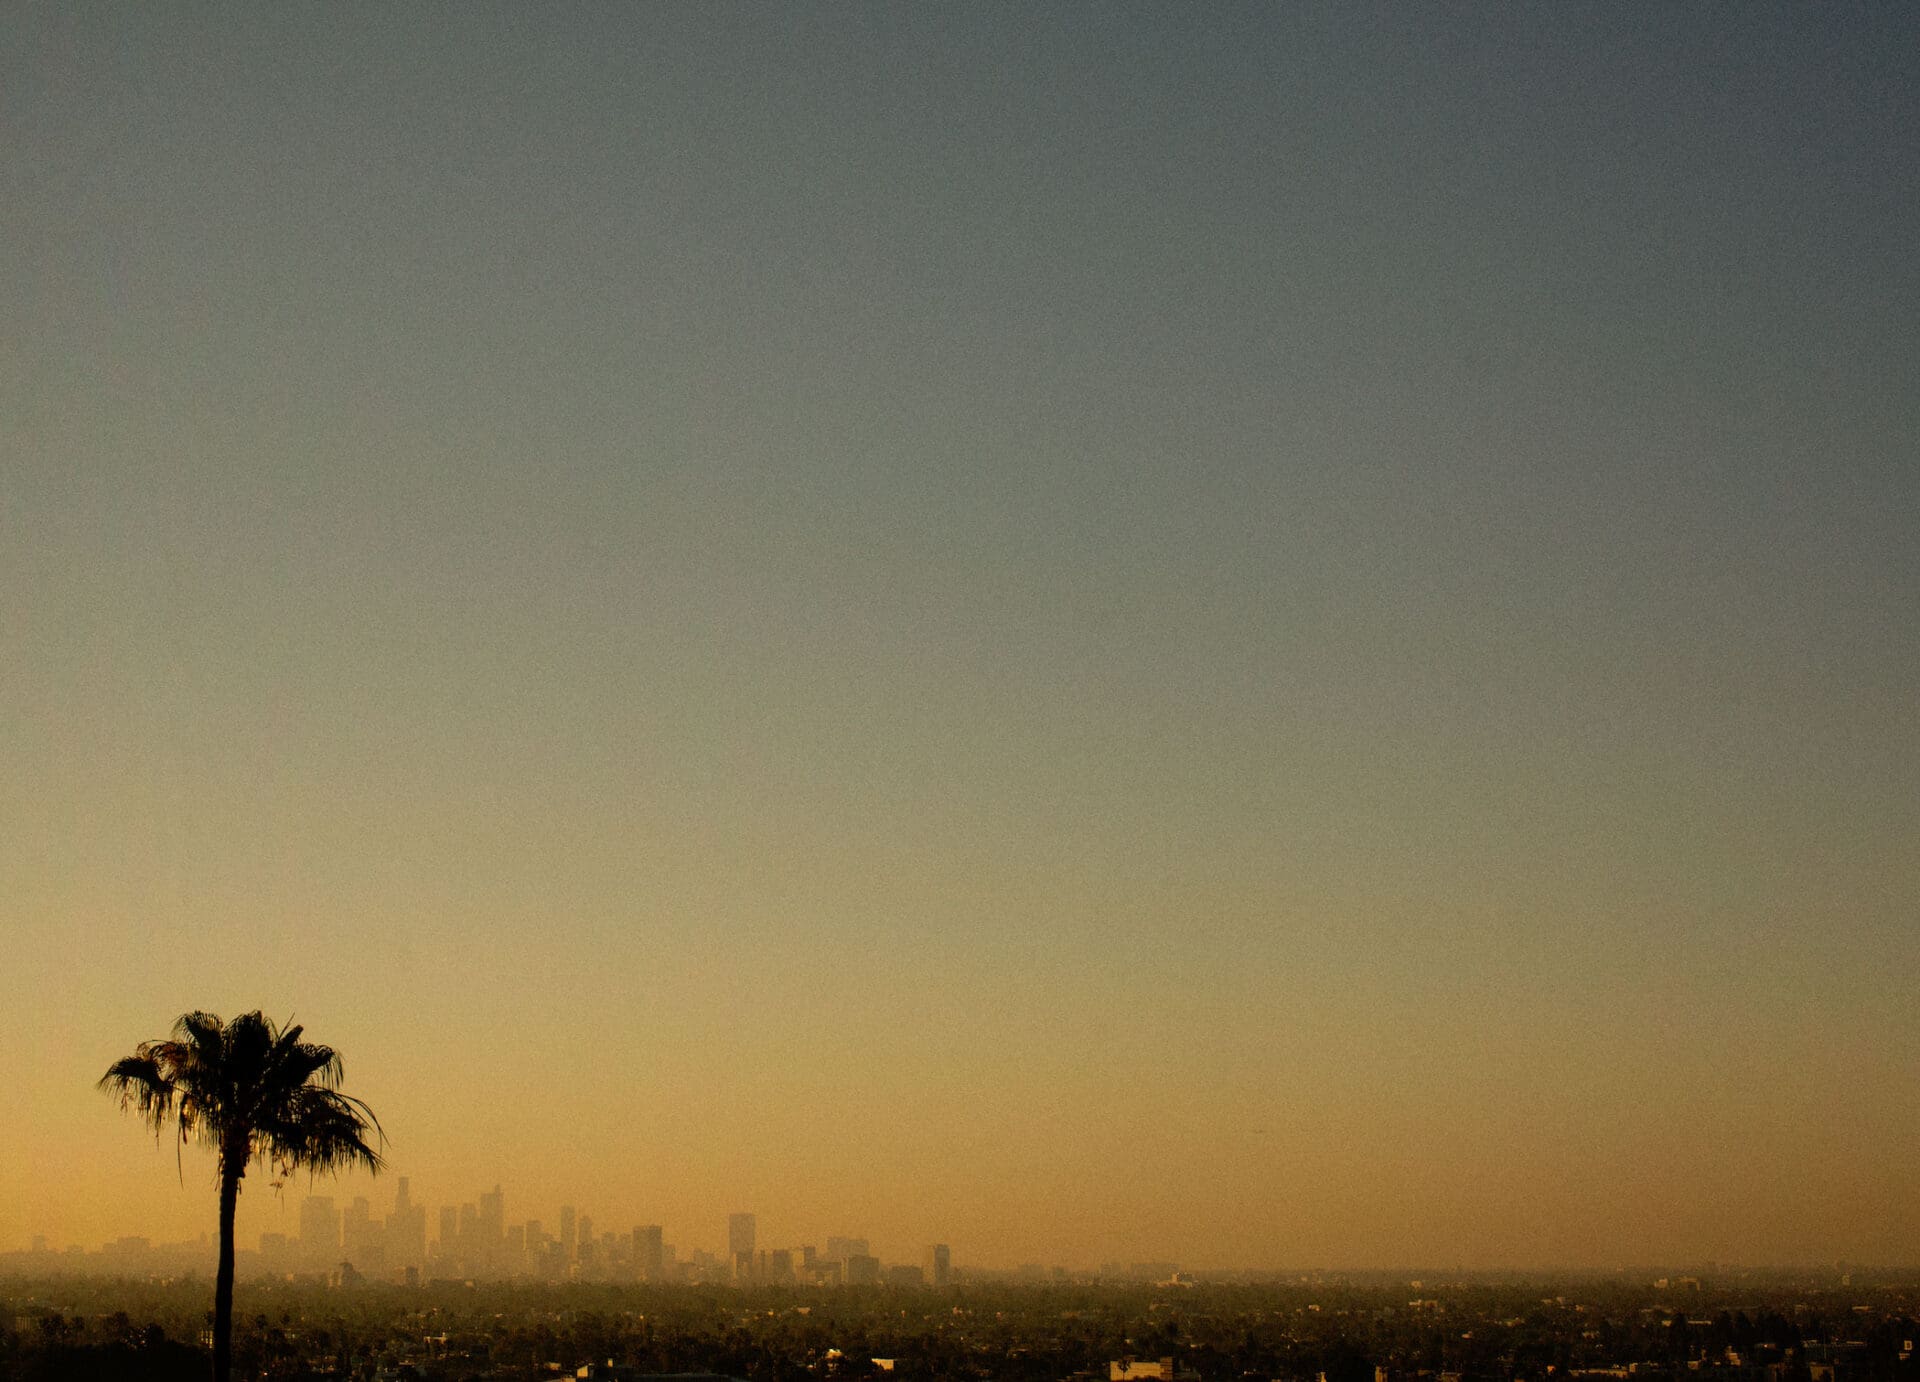 Focal Point, Erik Melvin | A palm tree to the bottom left of the image in the foreground of a cityscape of Los Angeles in the distance, in a yellow sunset haze. Photo by Erik Melvin